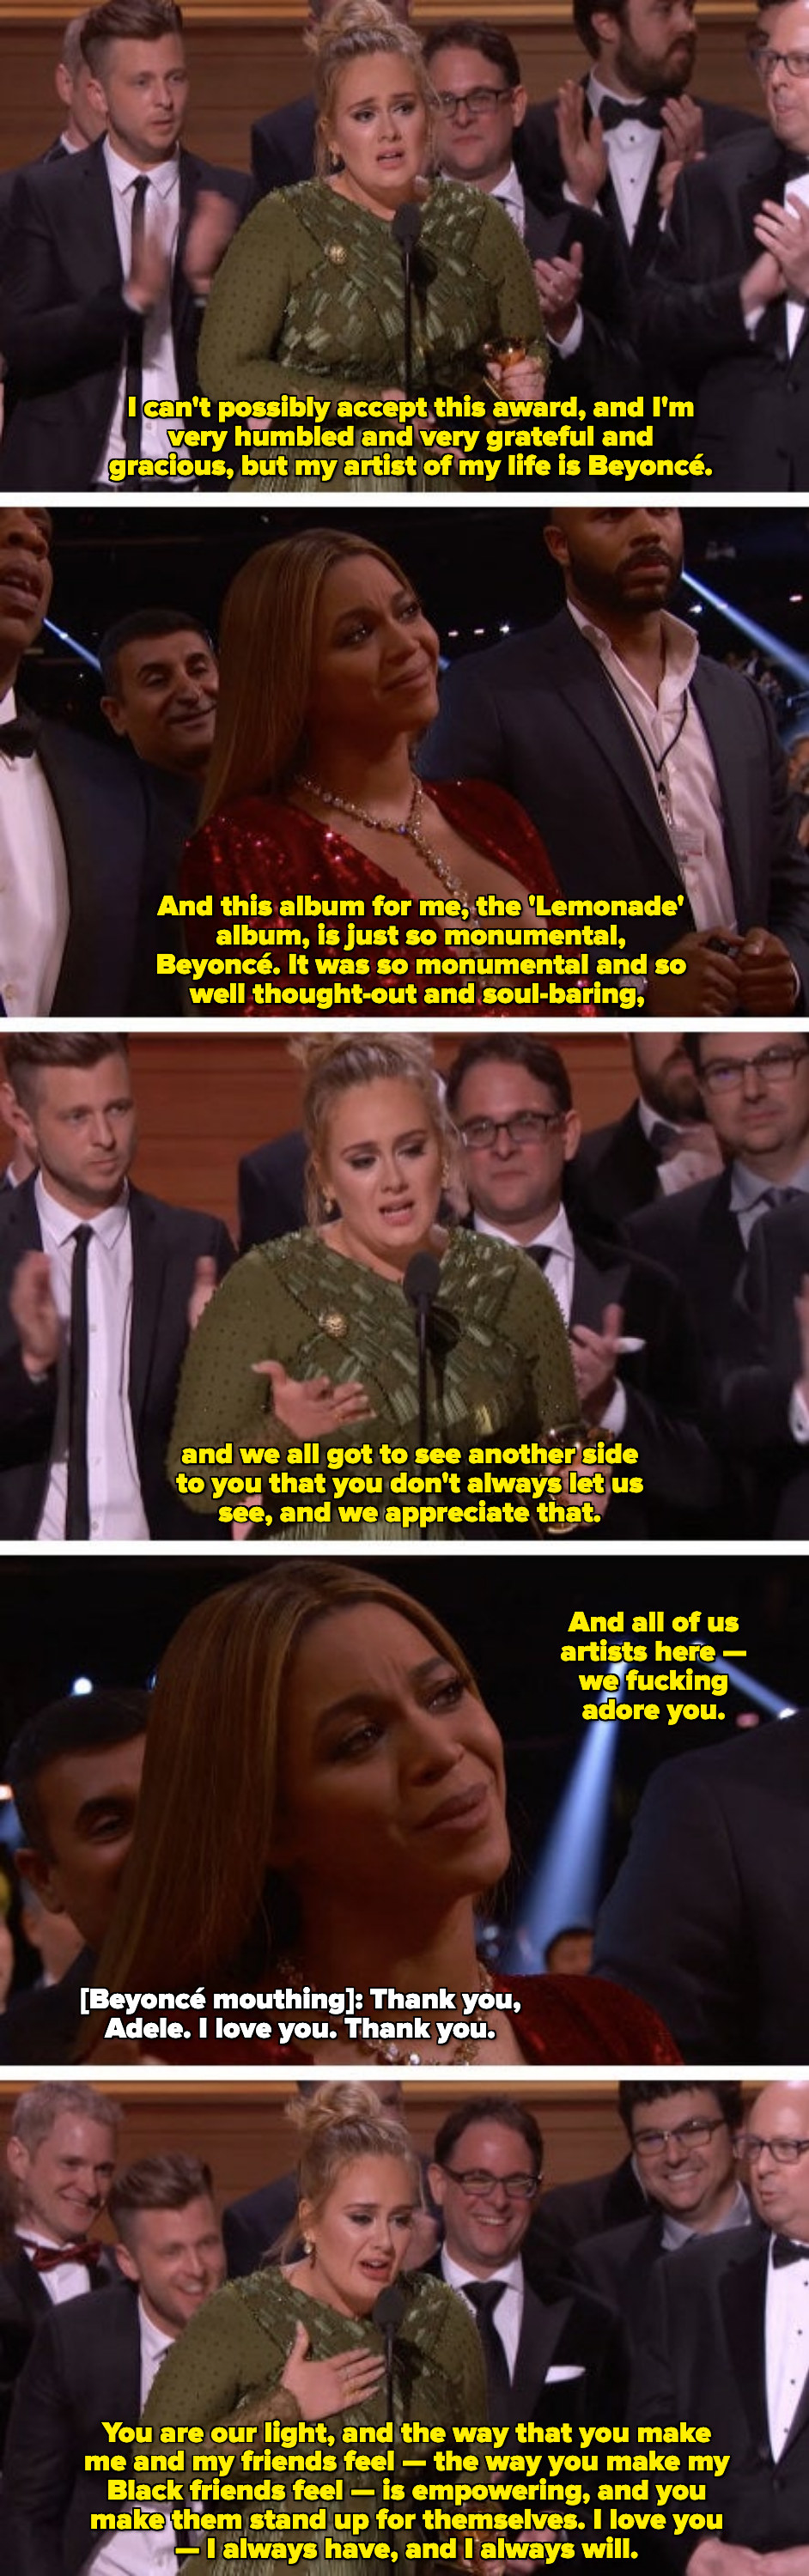 Adele praising Beyoncé for the &quot;Lemonade&quot; album, saying it was monumental and &quot;So well thought-out and soul-baring&quot;